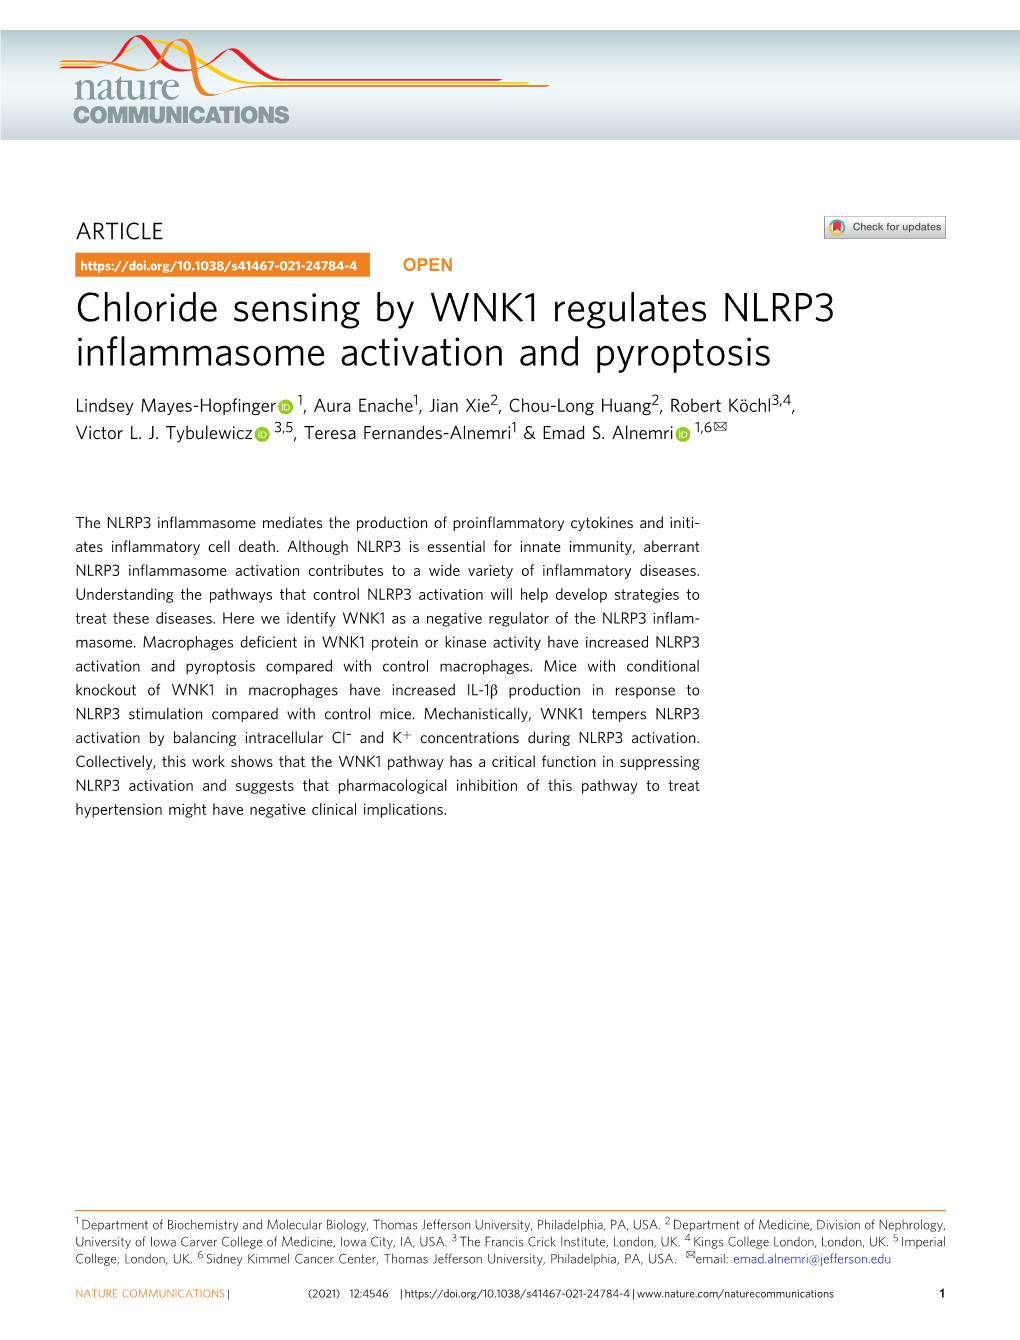 Chloride Sensing by WNK1 Regulates NLRP3 Inflammasome Activation